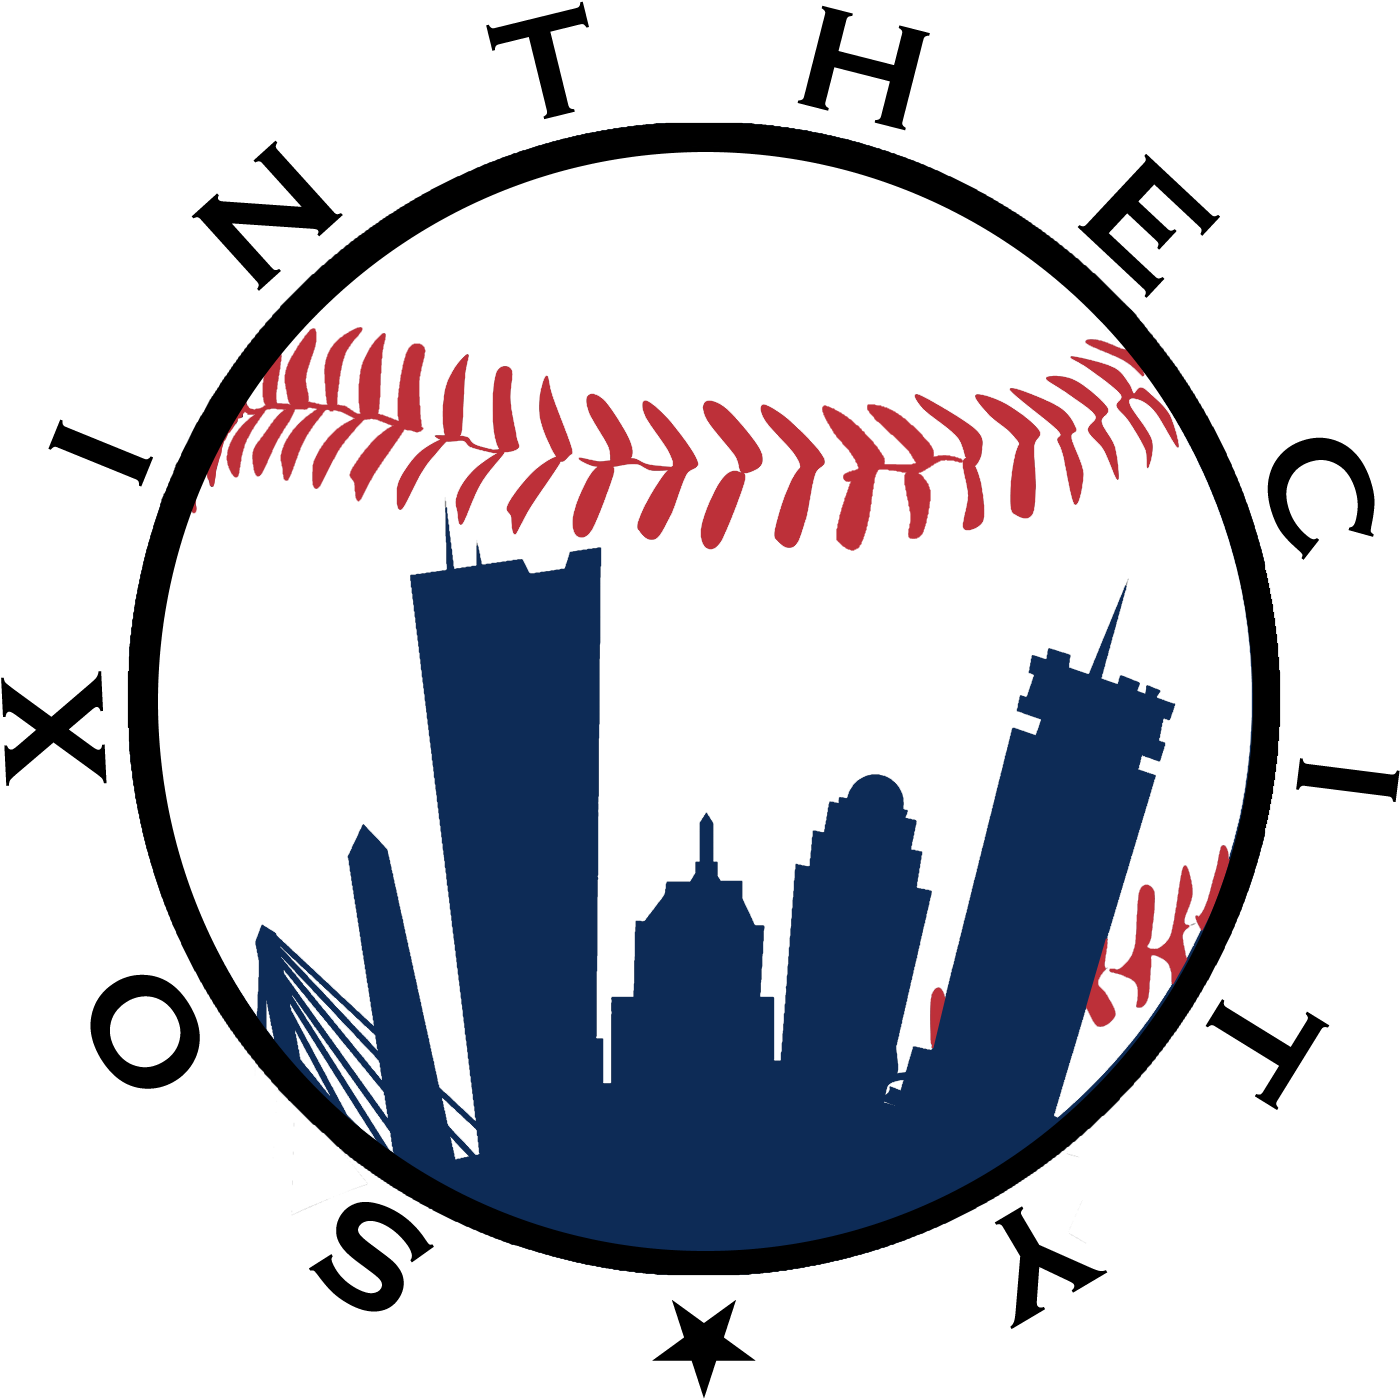 Hi, Welcome To The Sox In The City Testing Family - Baseball Symbol Round Car Magnet (1500x1500)